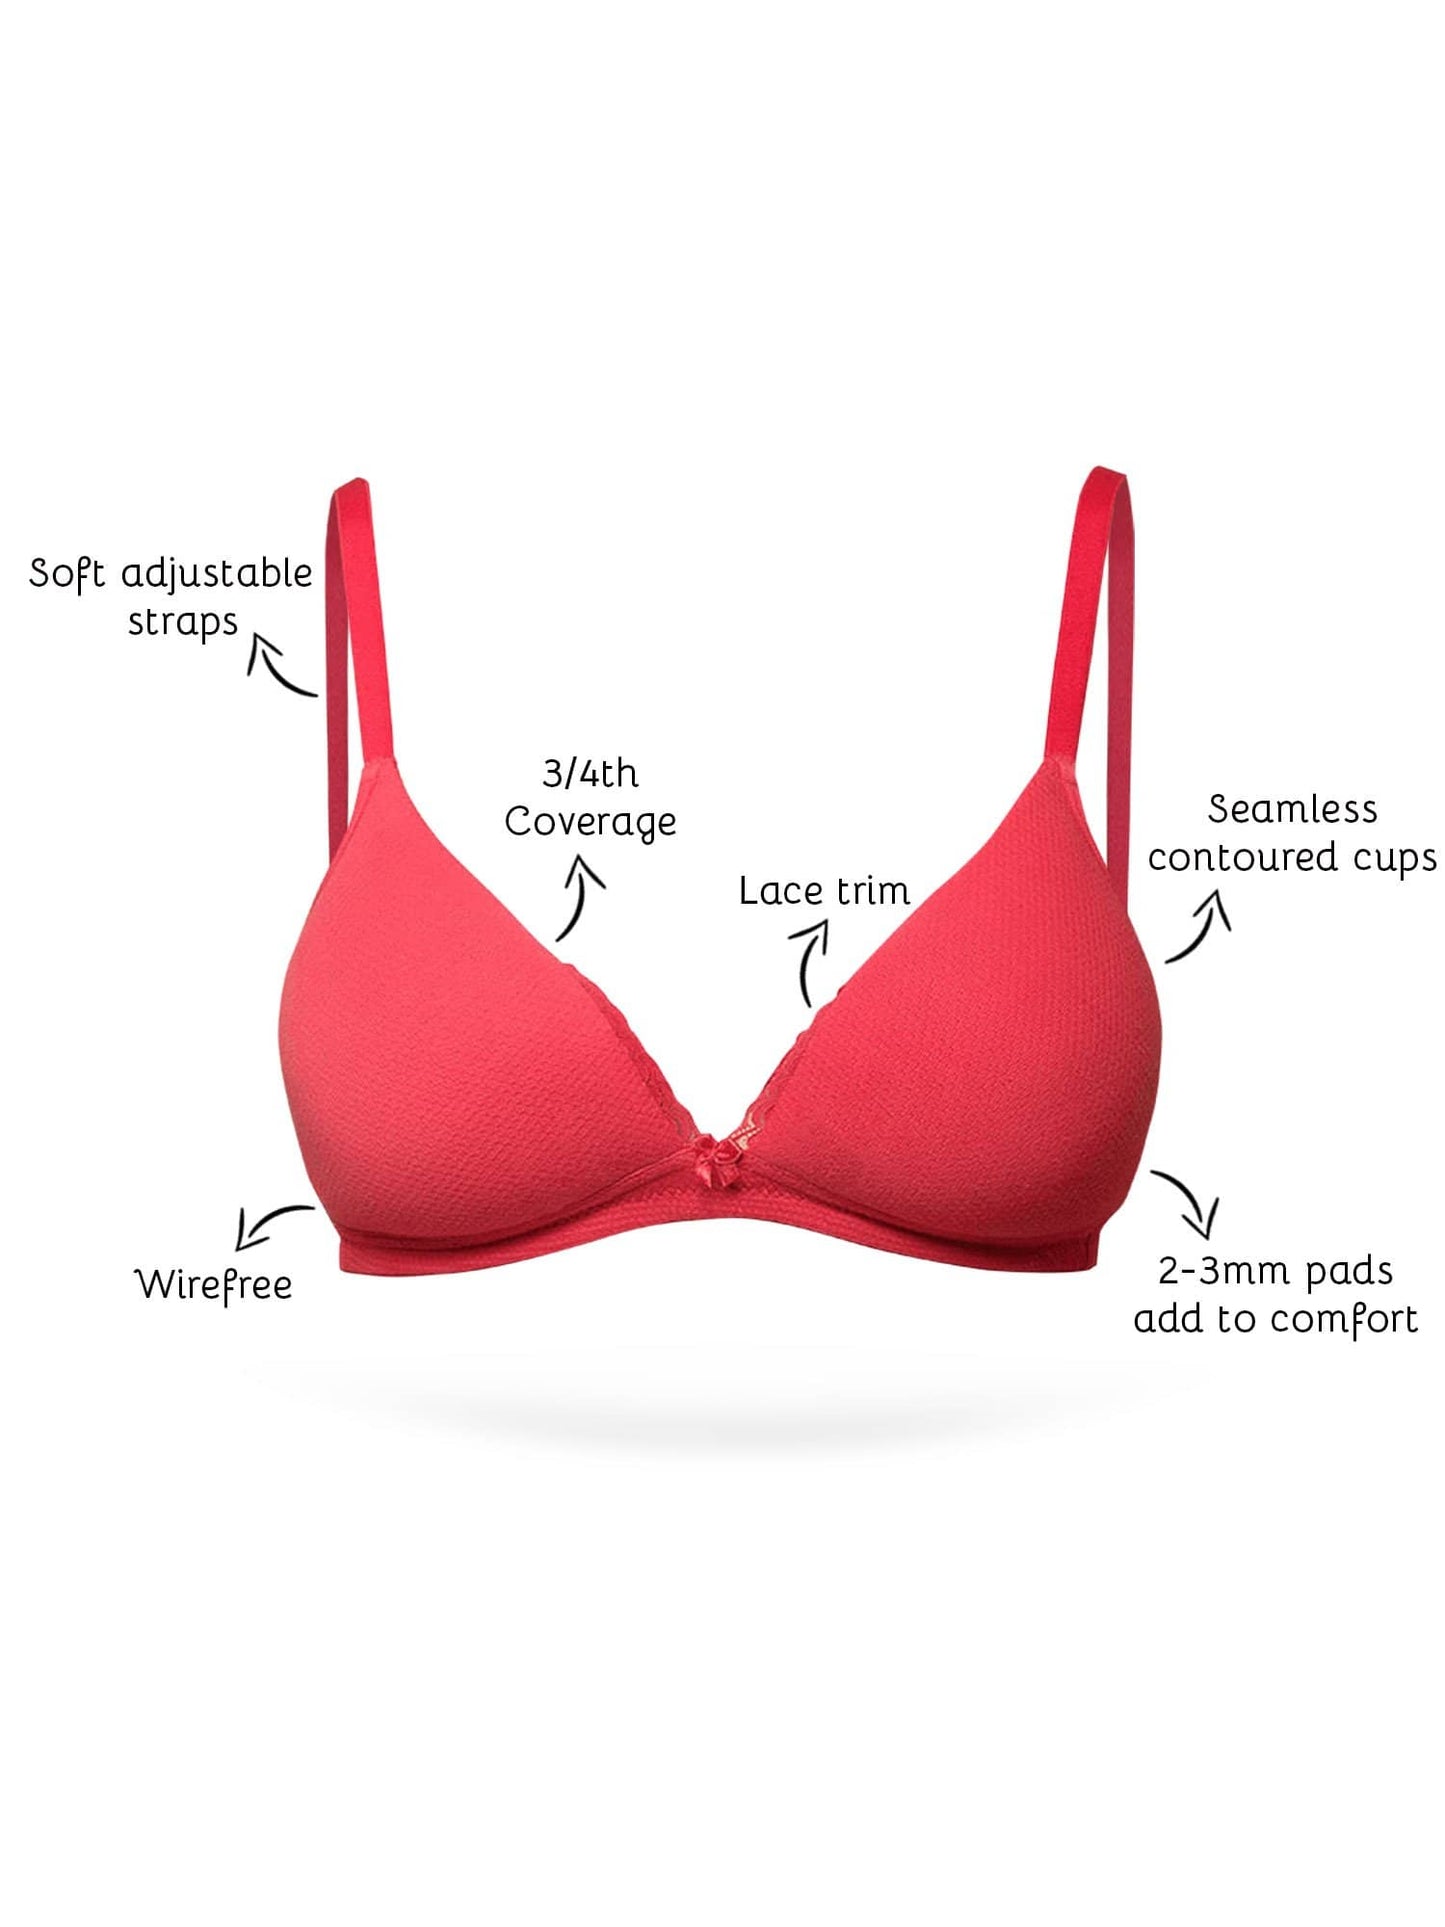 Organic Cotton  Antimicrobial Lace touch T-shirt Bra(Pack of 3)-ISB042-B.Pink_B.Pink_B.Pink-